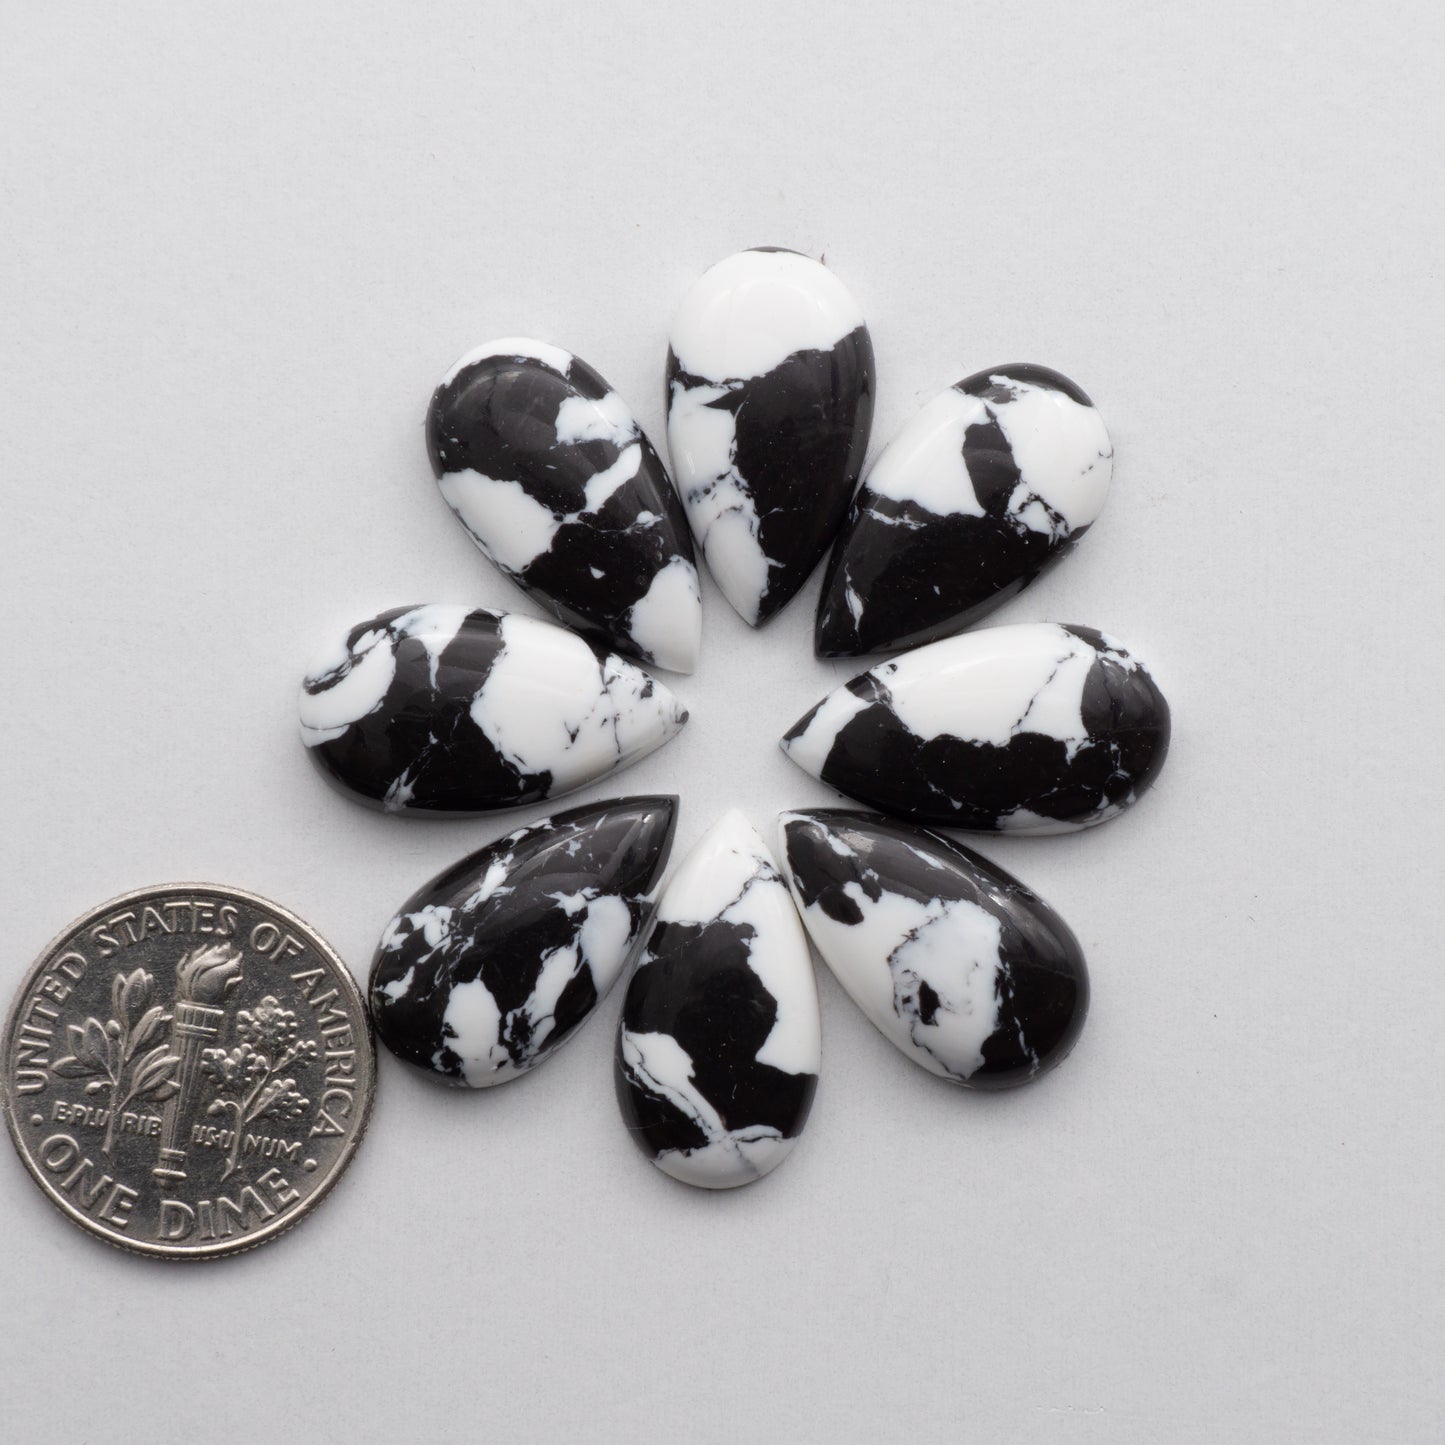 White Buffalo Cabochons are expertly cut and polished from composite material to create a stunning and durable gemstone. These stones are unbacked.